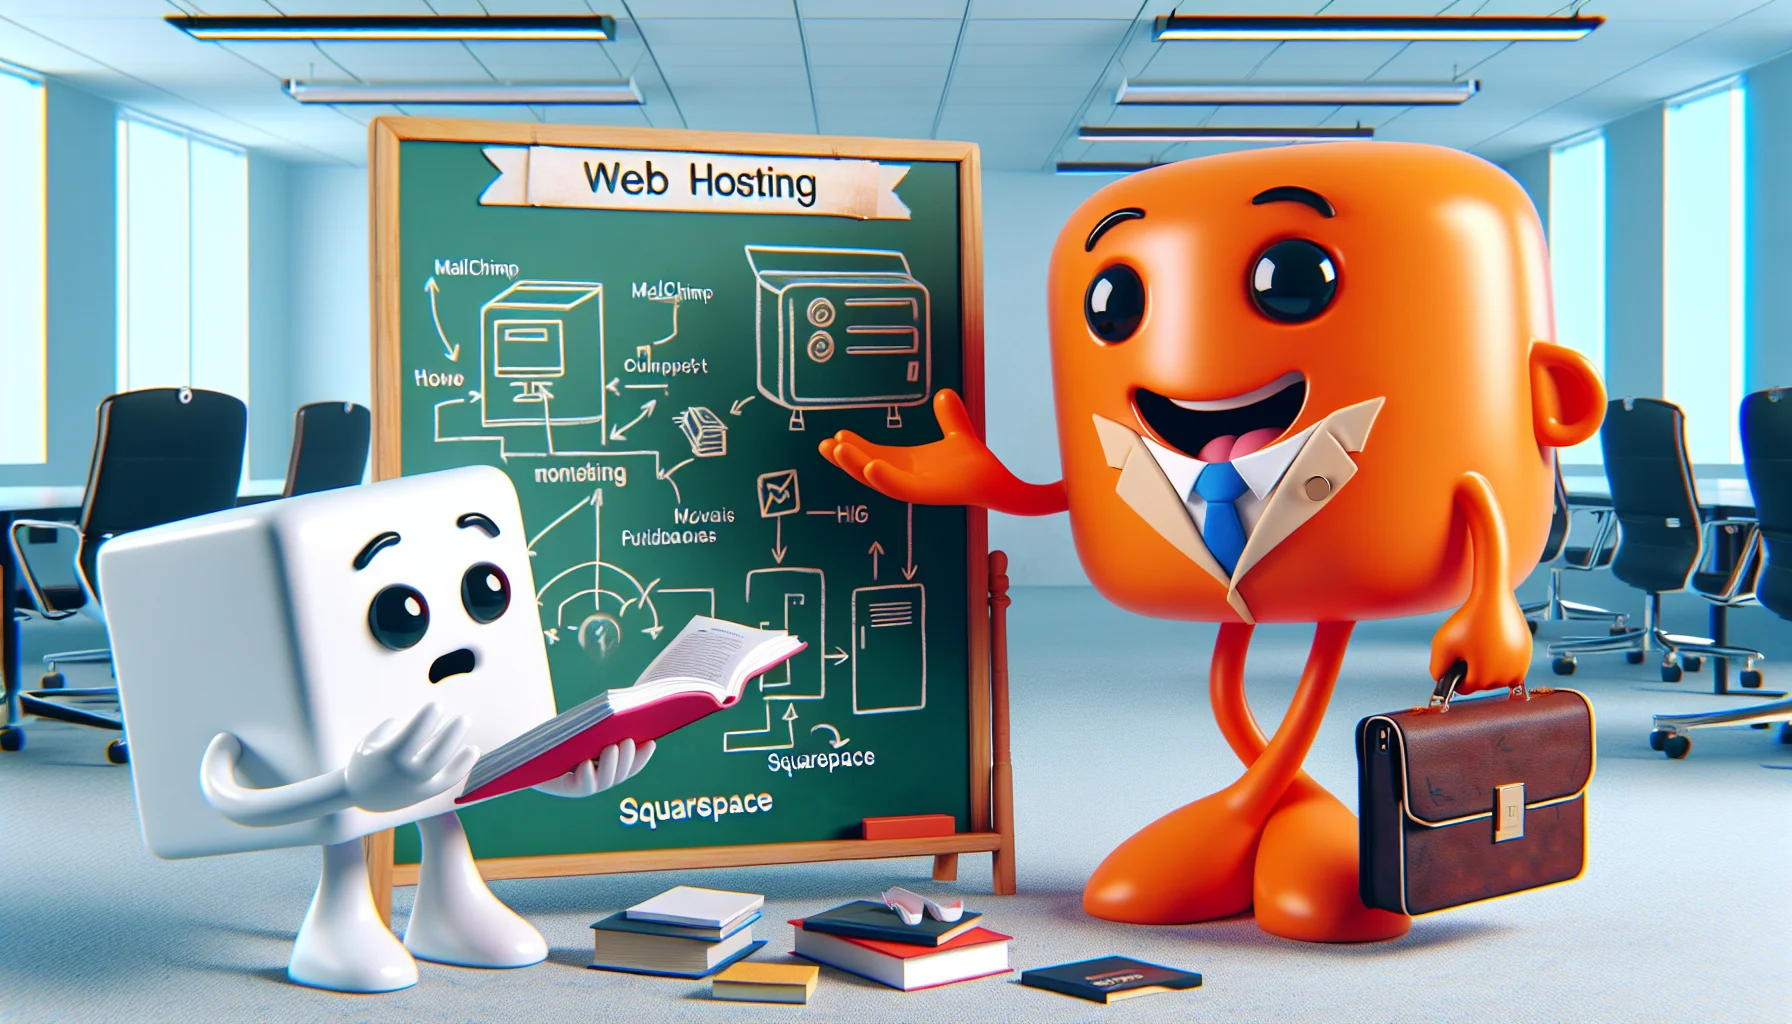 Picture a funny scenario where an orange anthropomorphic 'MailChimp', with an official suit and briefcase, is cheerfully chattering to a white cubic creature, labelled as 'SquareSpace', who's flipping through an instruction manual on web hosting. The MailChimp is pointing to a chalkboard with complex diagrams representing web hosting concepts, while the SquareSpace continues to be perplexed. This image is set in a bright, modern office space, complete with cool tech gadgets and conference tables in the background.